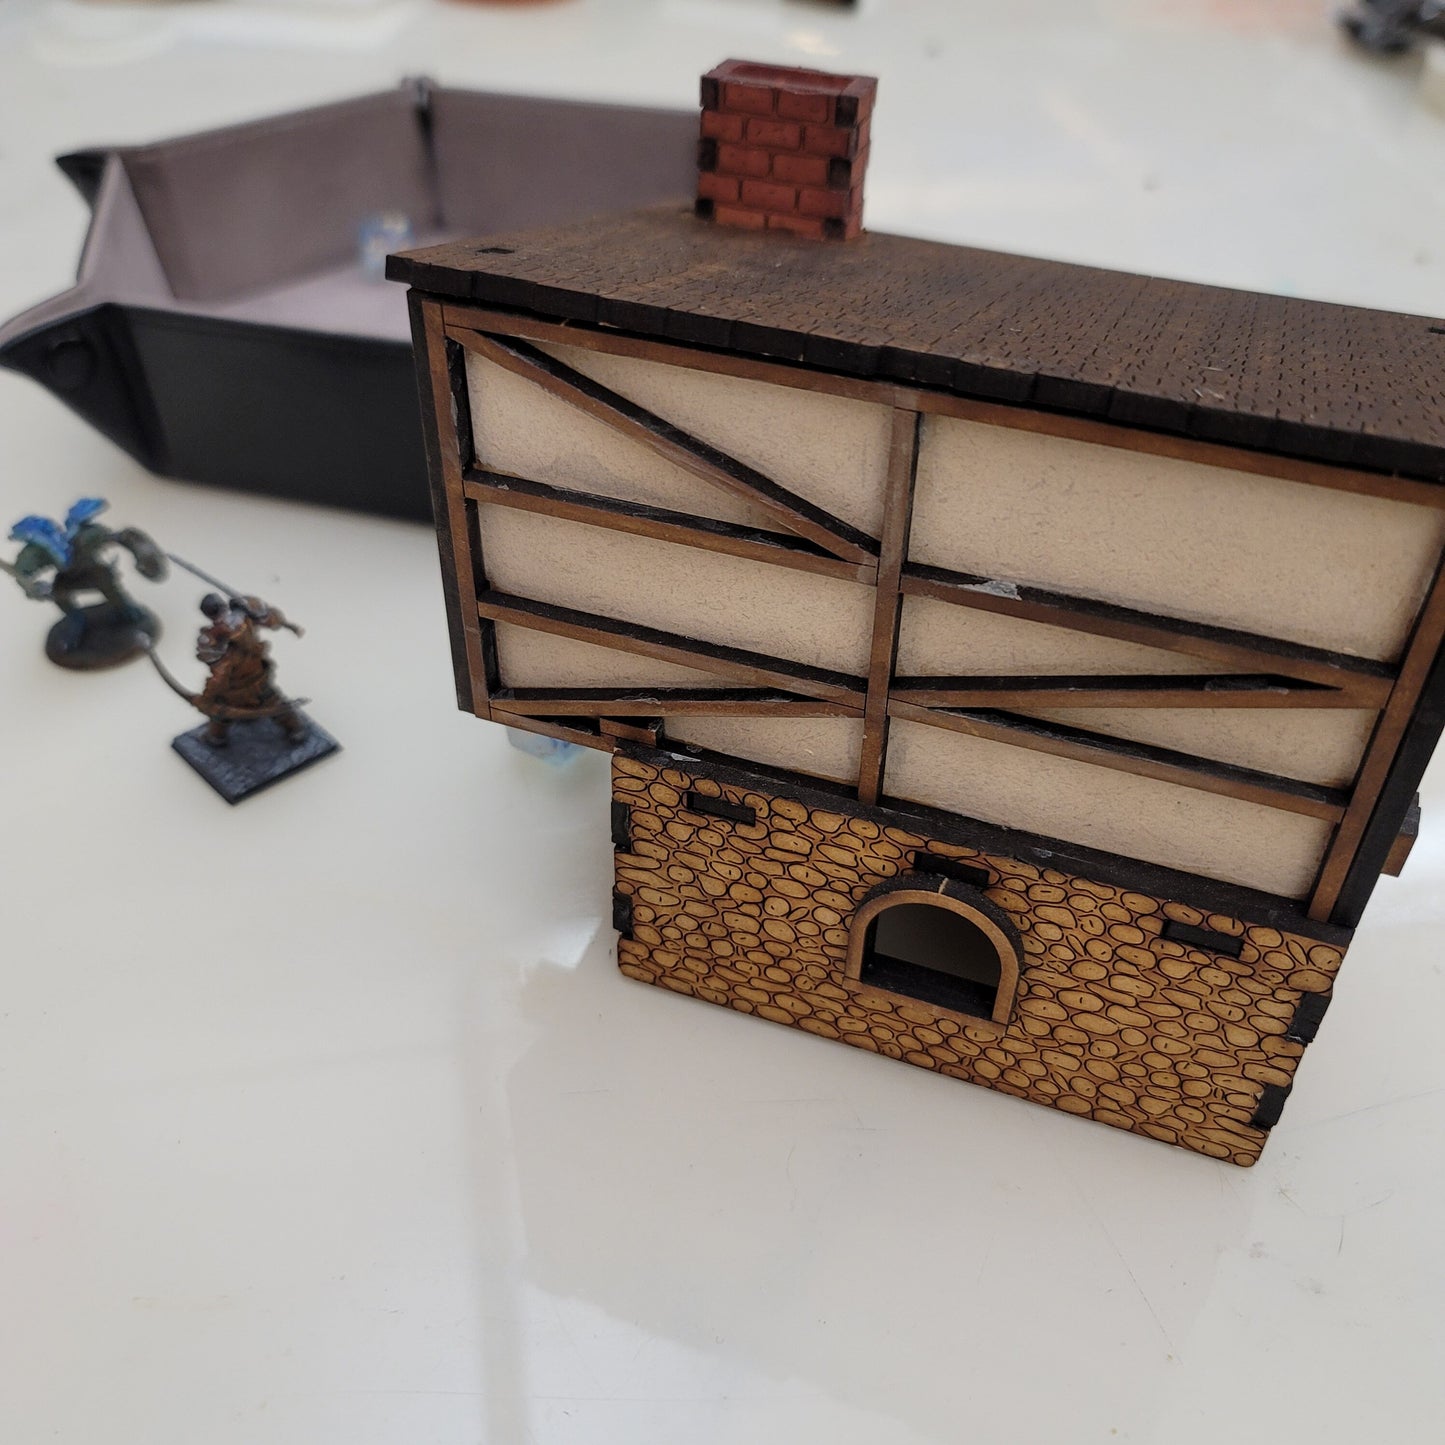 Medieval Village - Small Two-Story House - MDF Laser Cut 28mm Kits - CreatorpultGames - Holiday MDF Kits